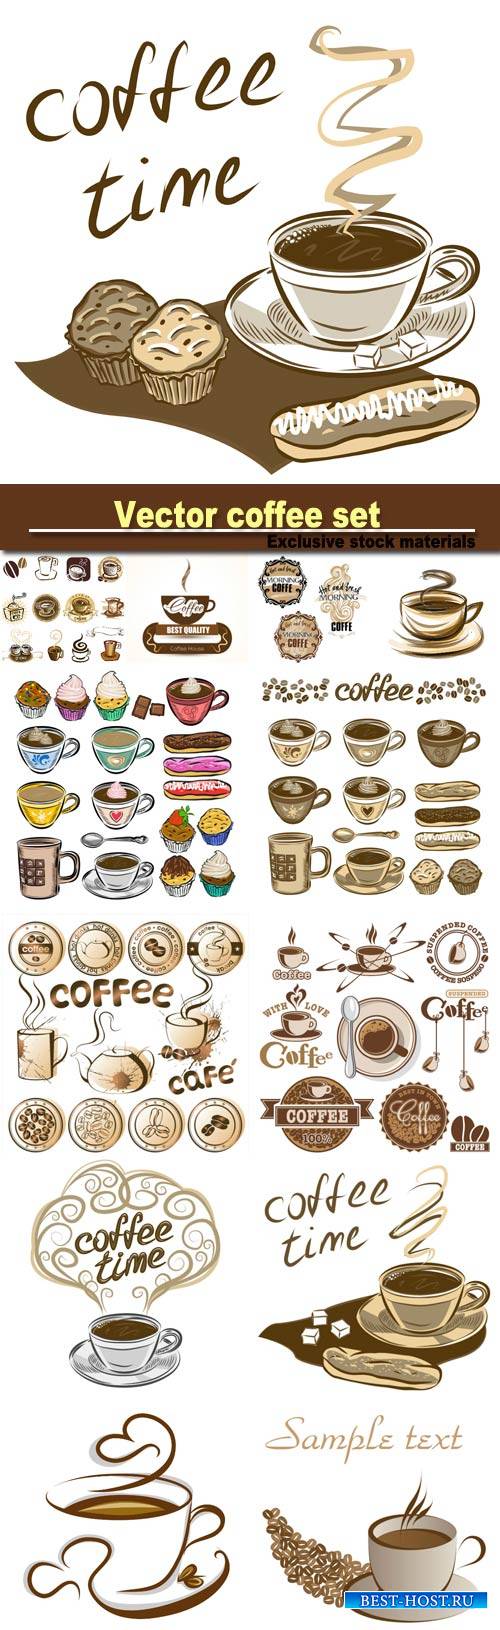 Hand drawn vector coffee set, coffee cups and cakes